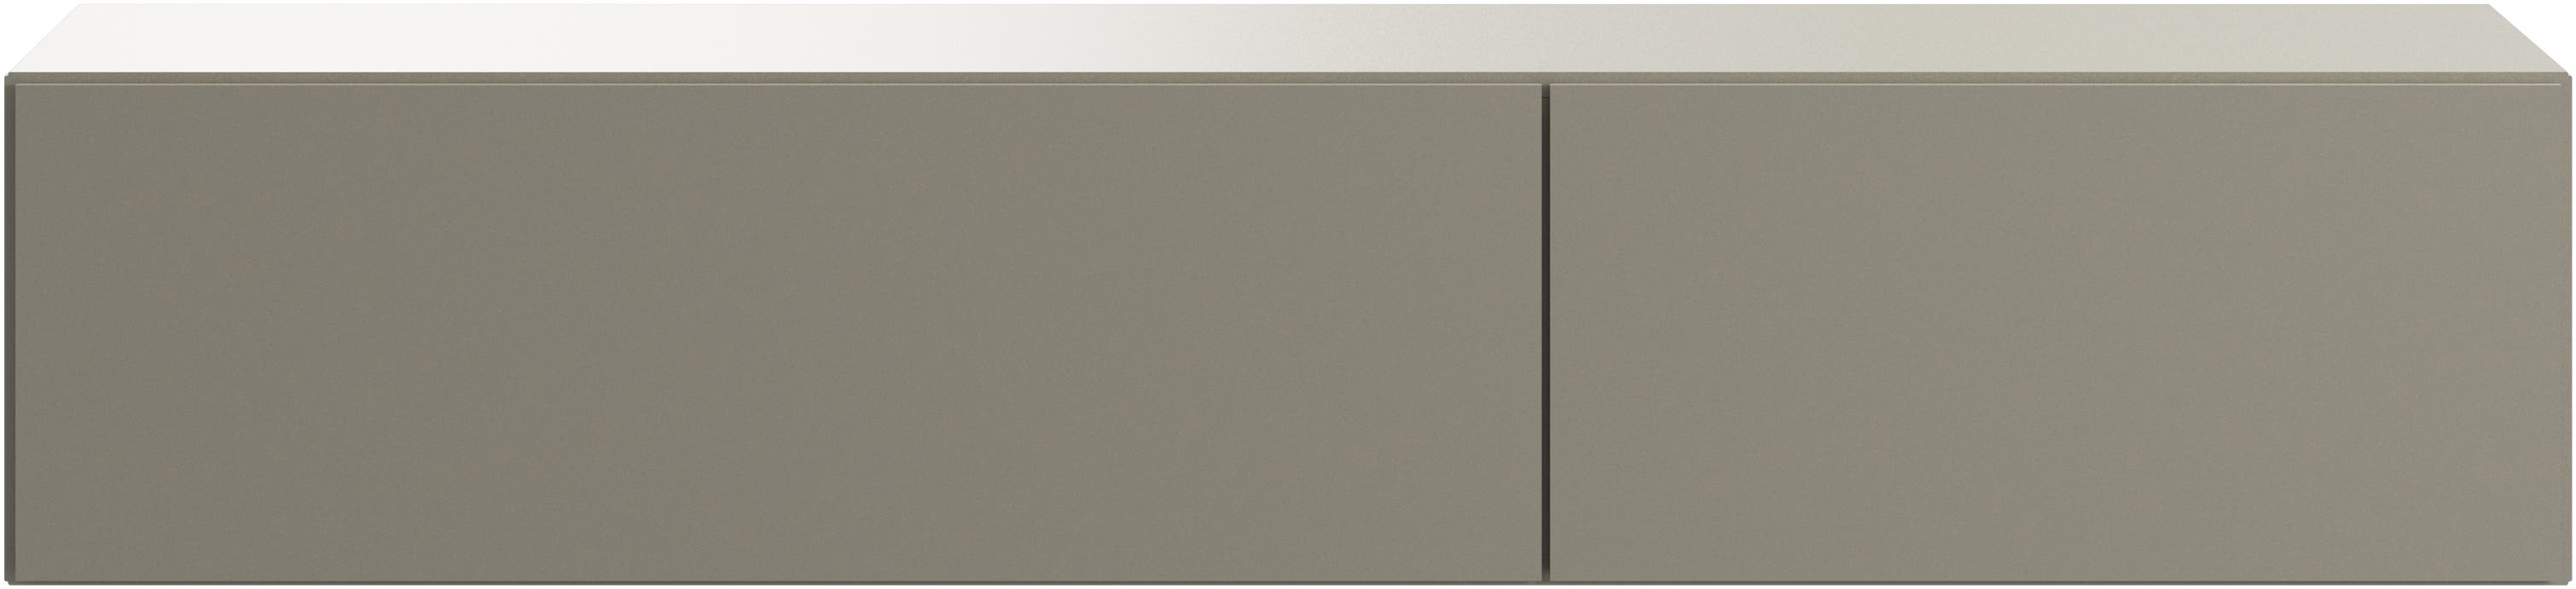 Lugano wall mounted cabinet with flip-up doors